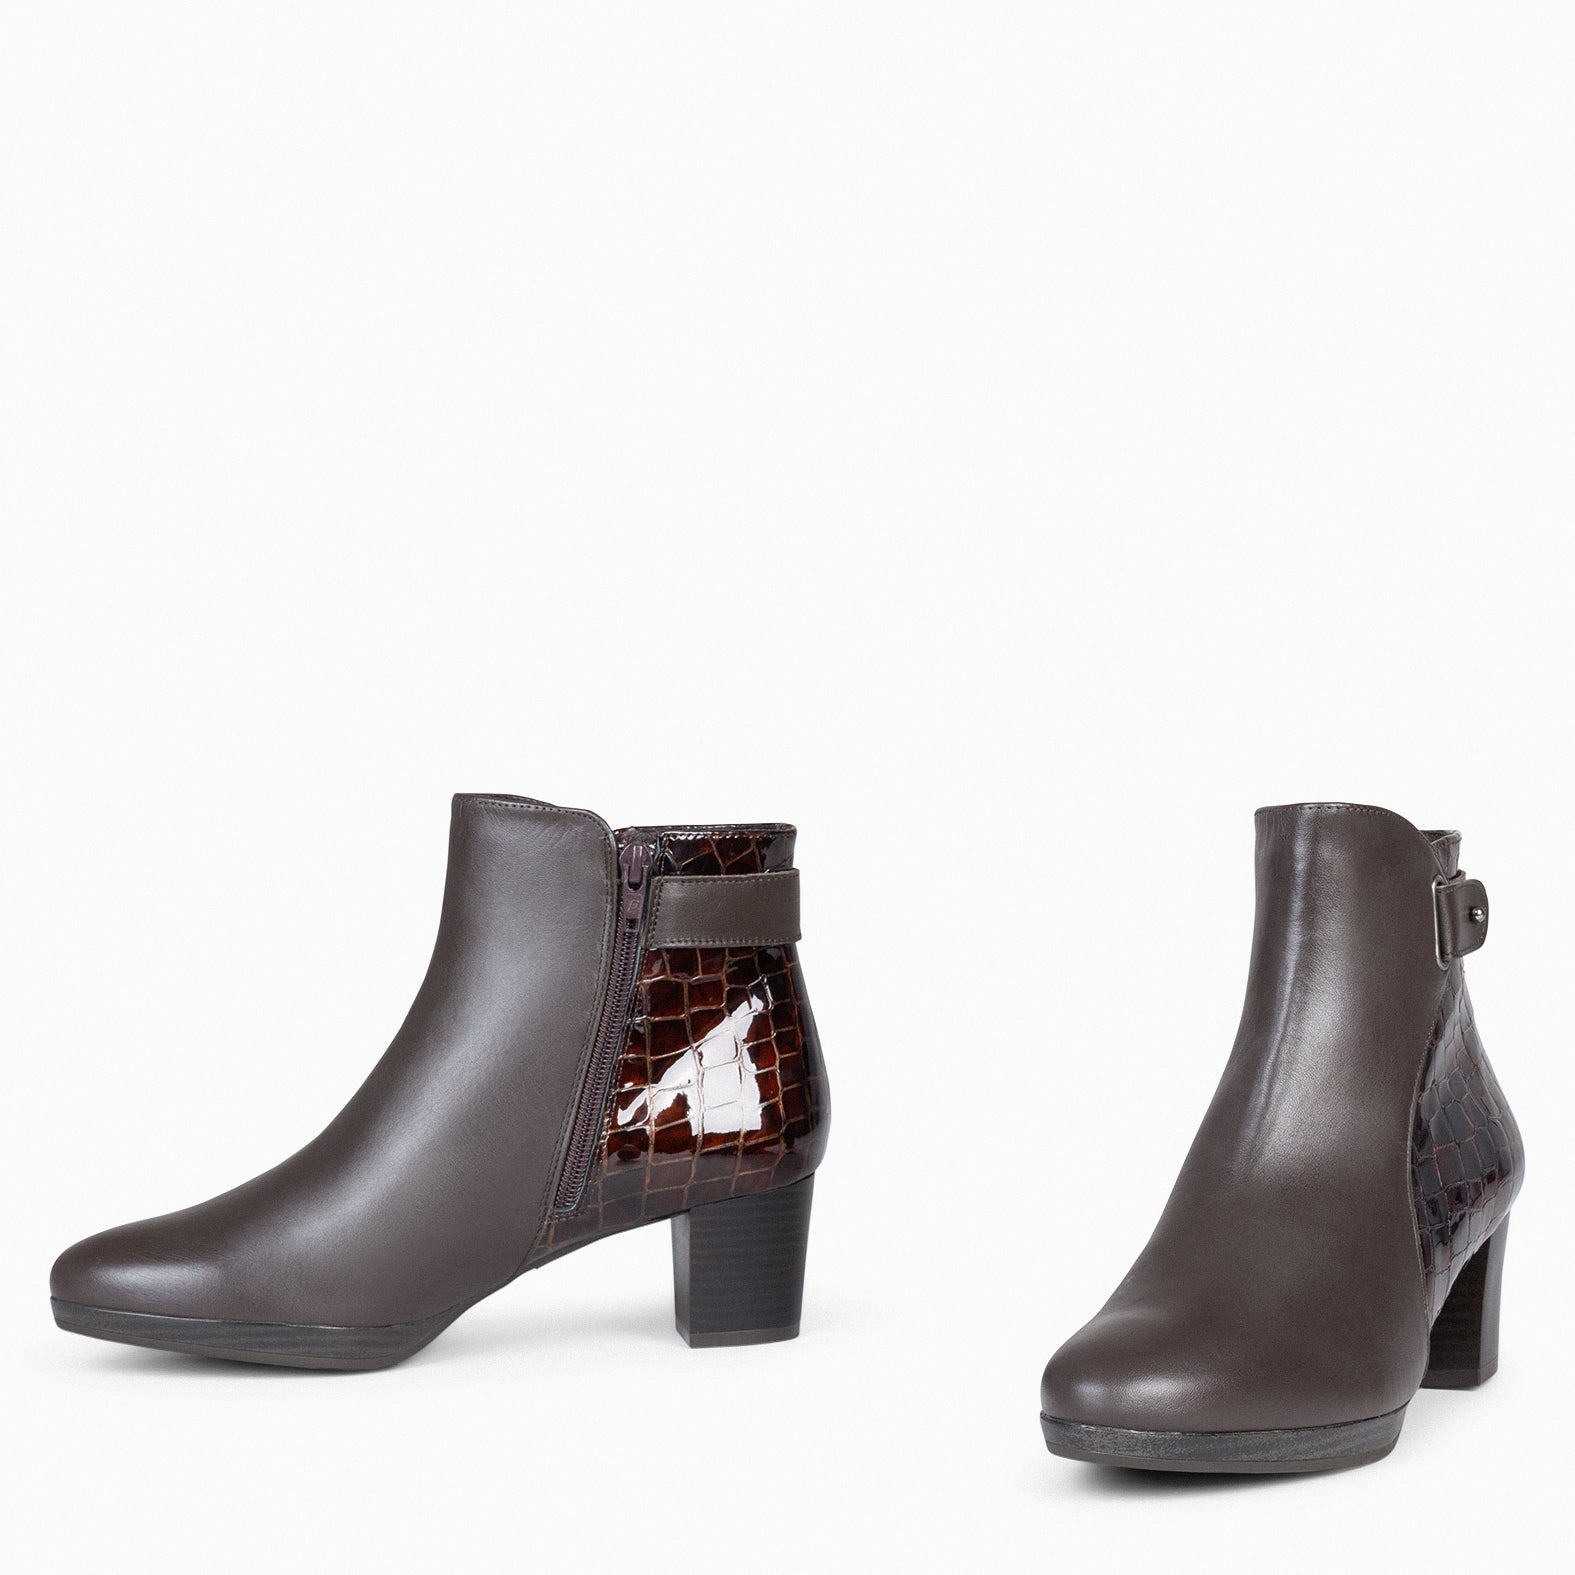 LENA – BROWN Rounded Booties